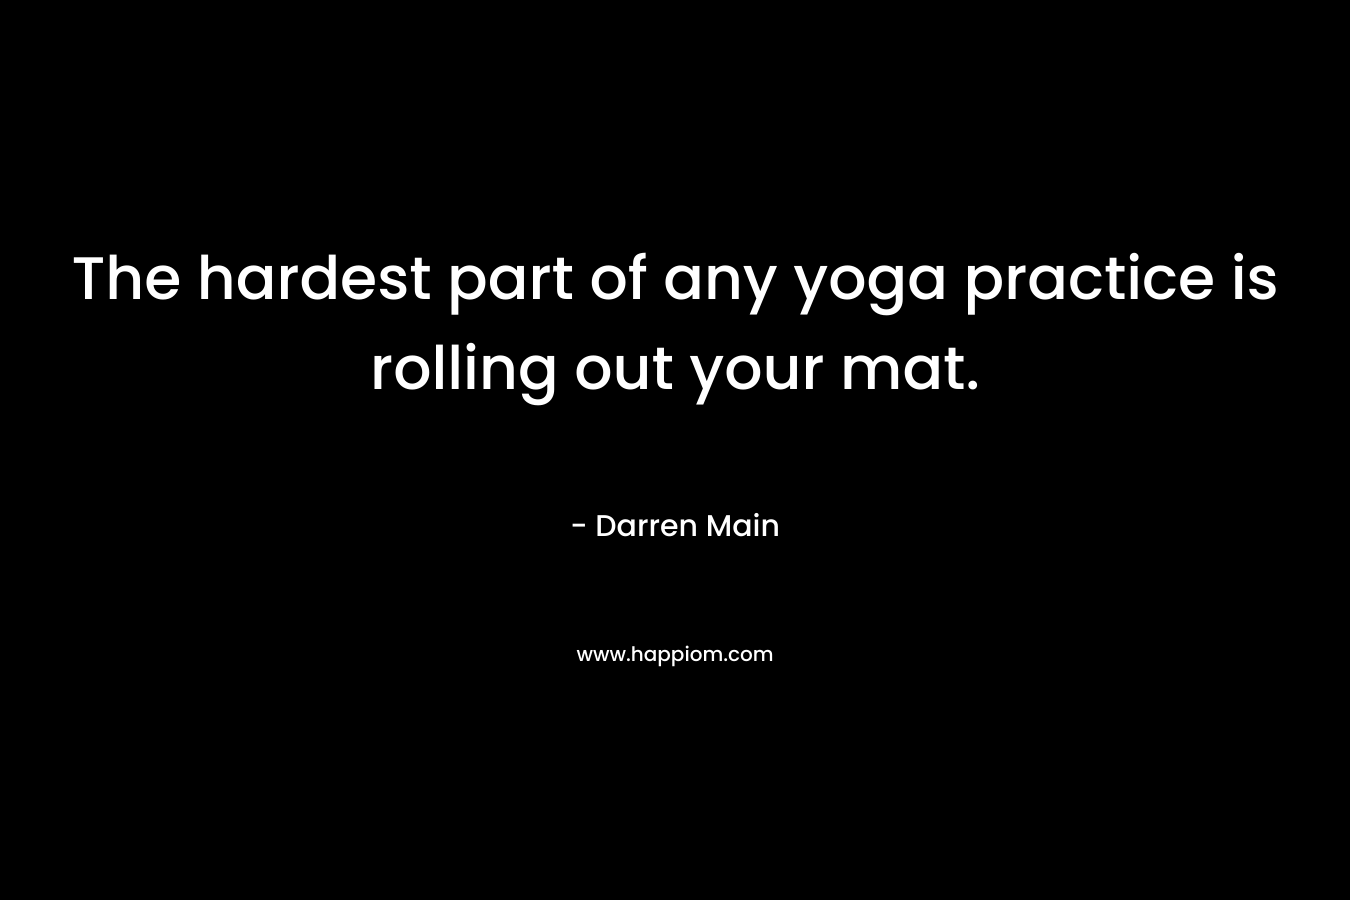 The hardest part of any yoga practice is rolling out your mat.